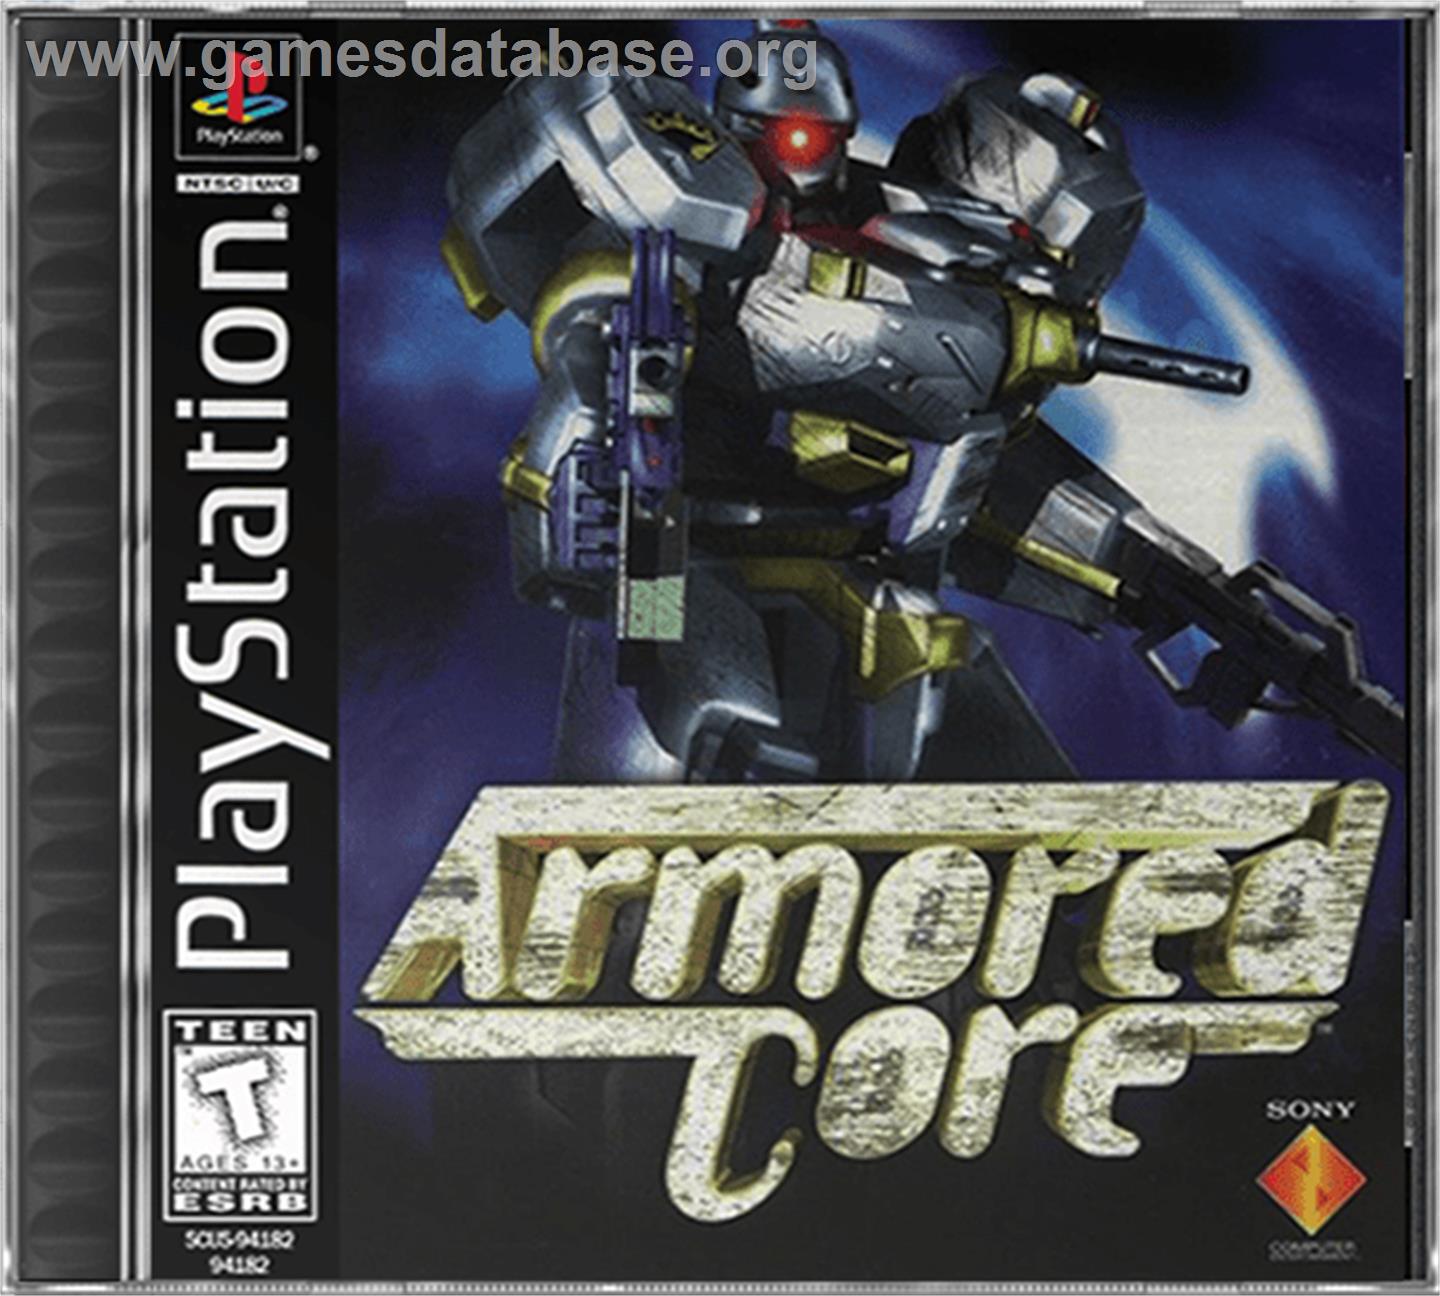 Armored Core - Sony Playstation - Artwork - Box